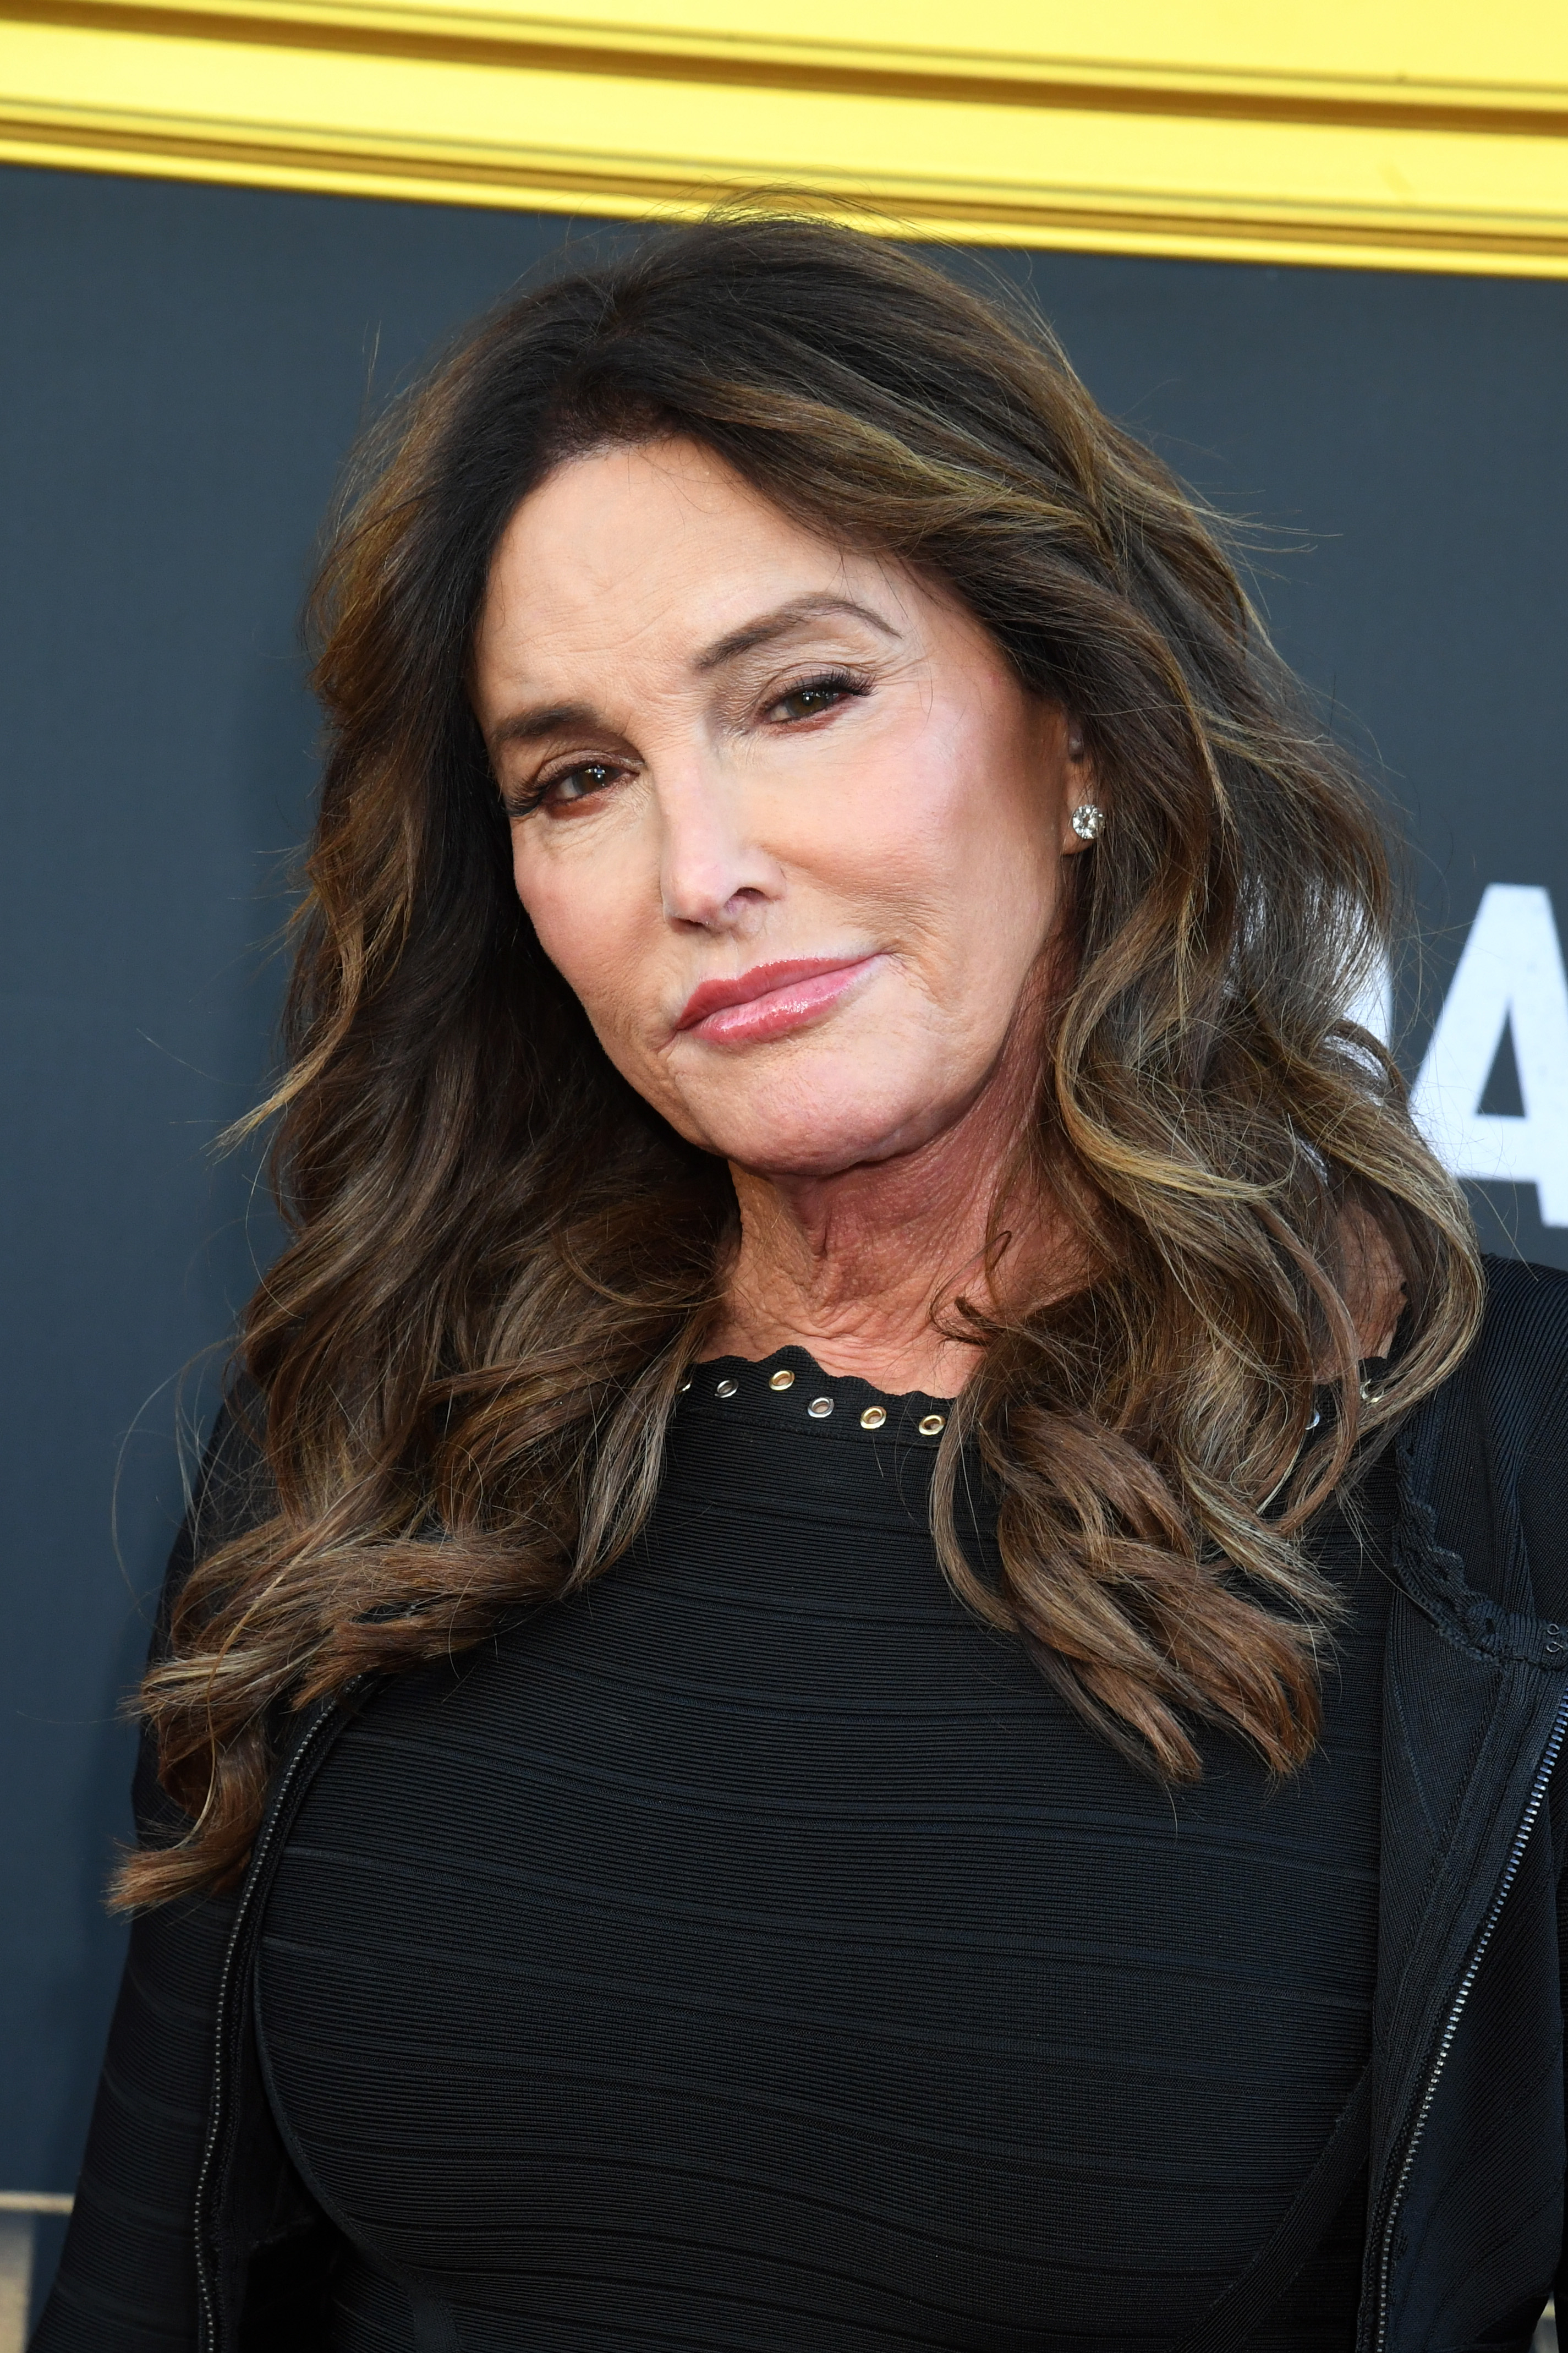 Close-up of Caitlyn at a media event